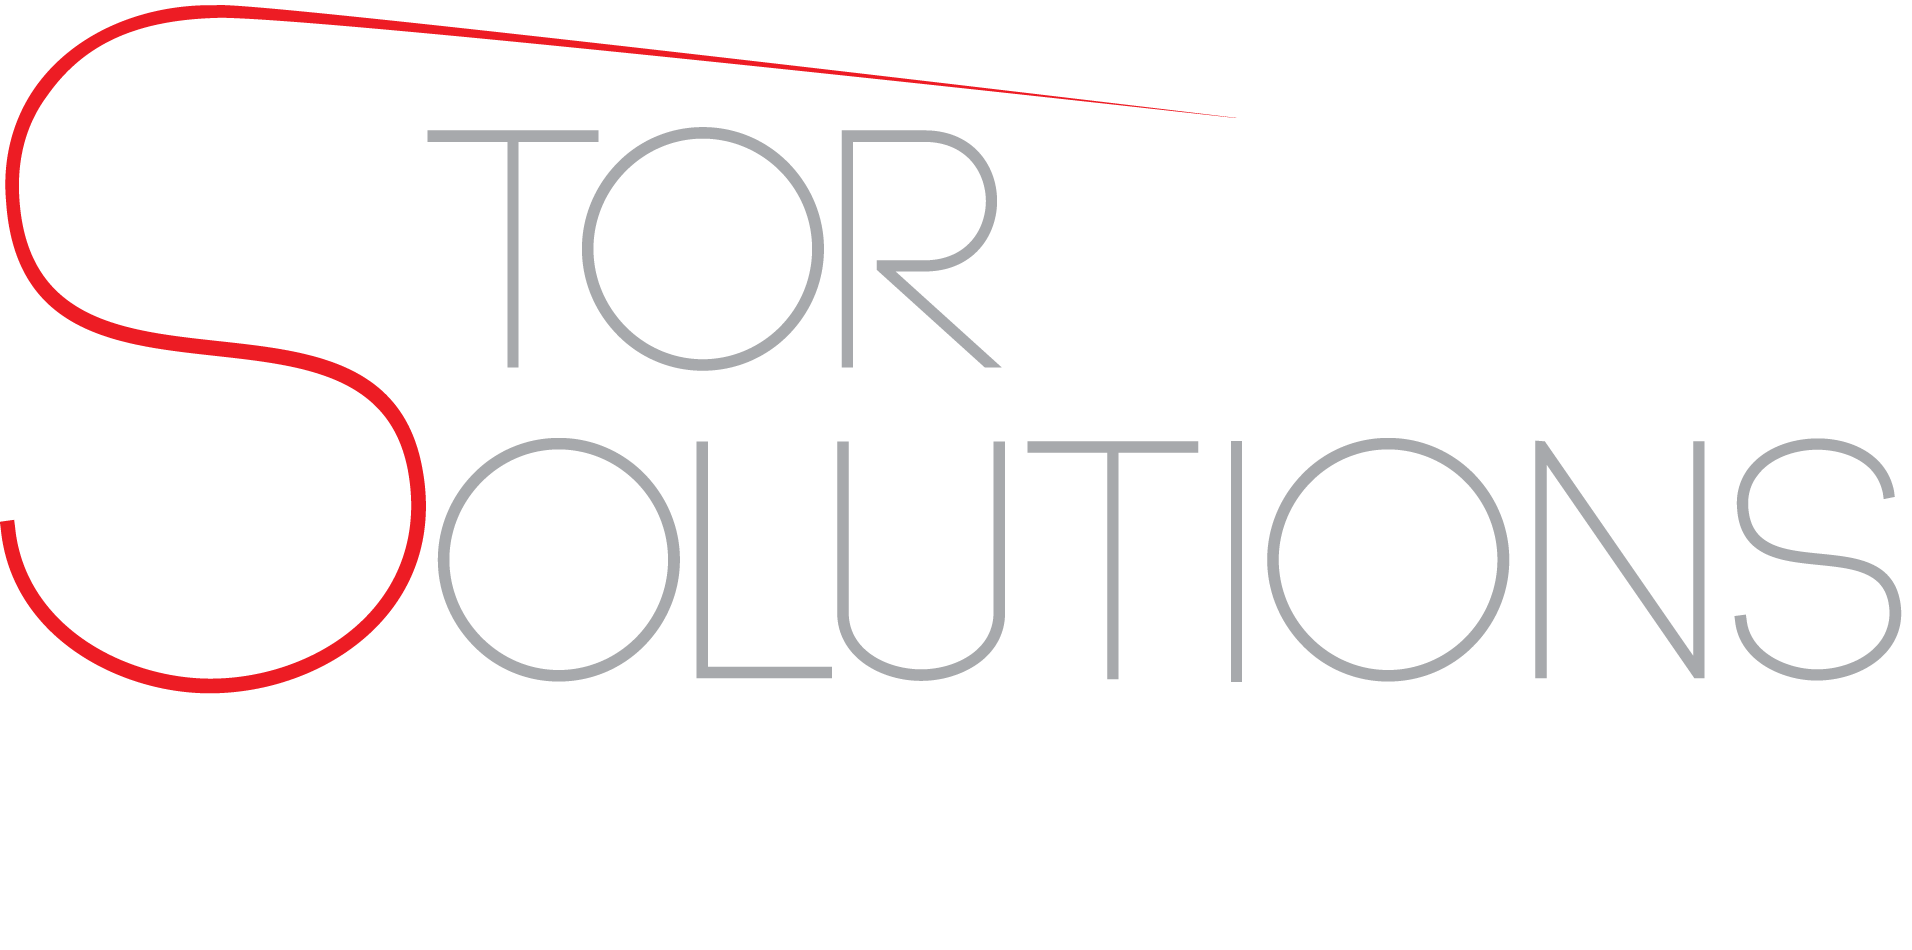 STOR SOLUTIONS